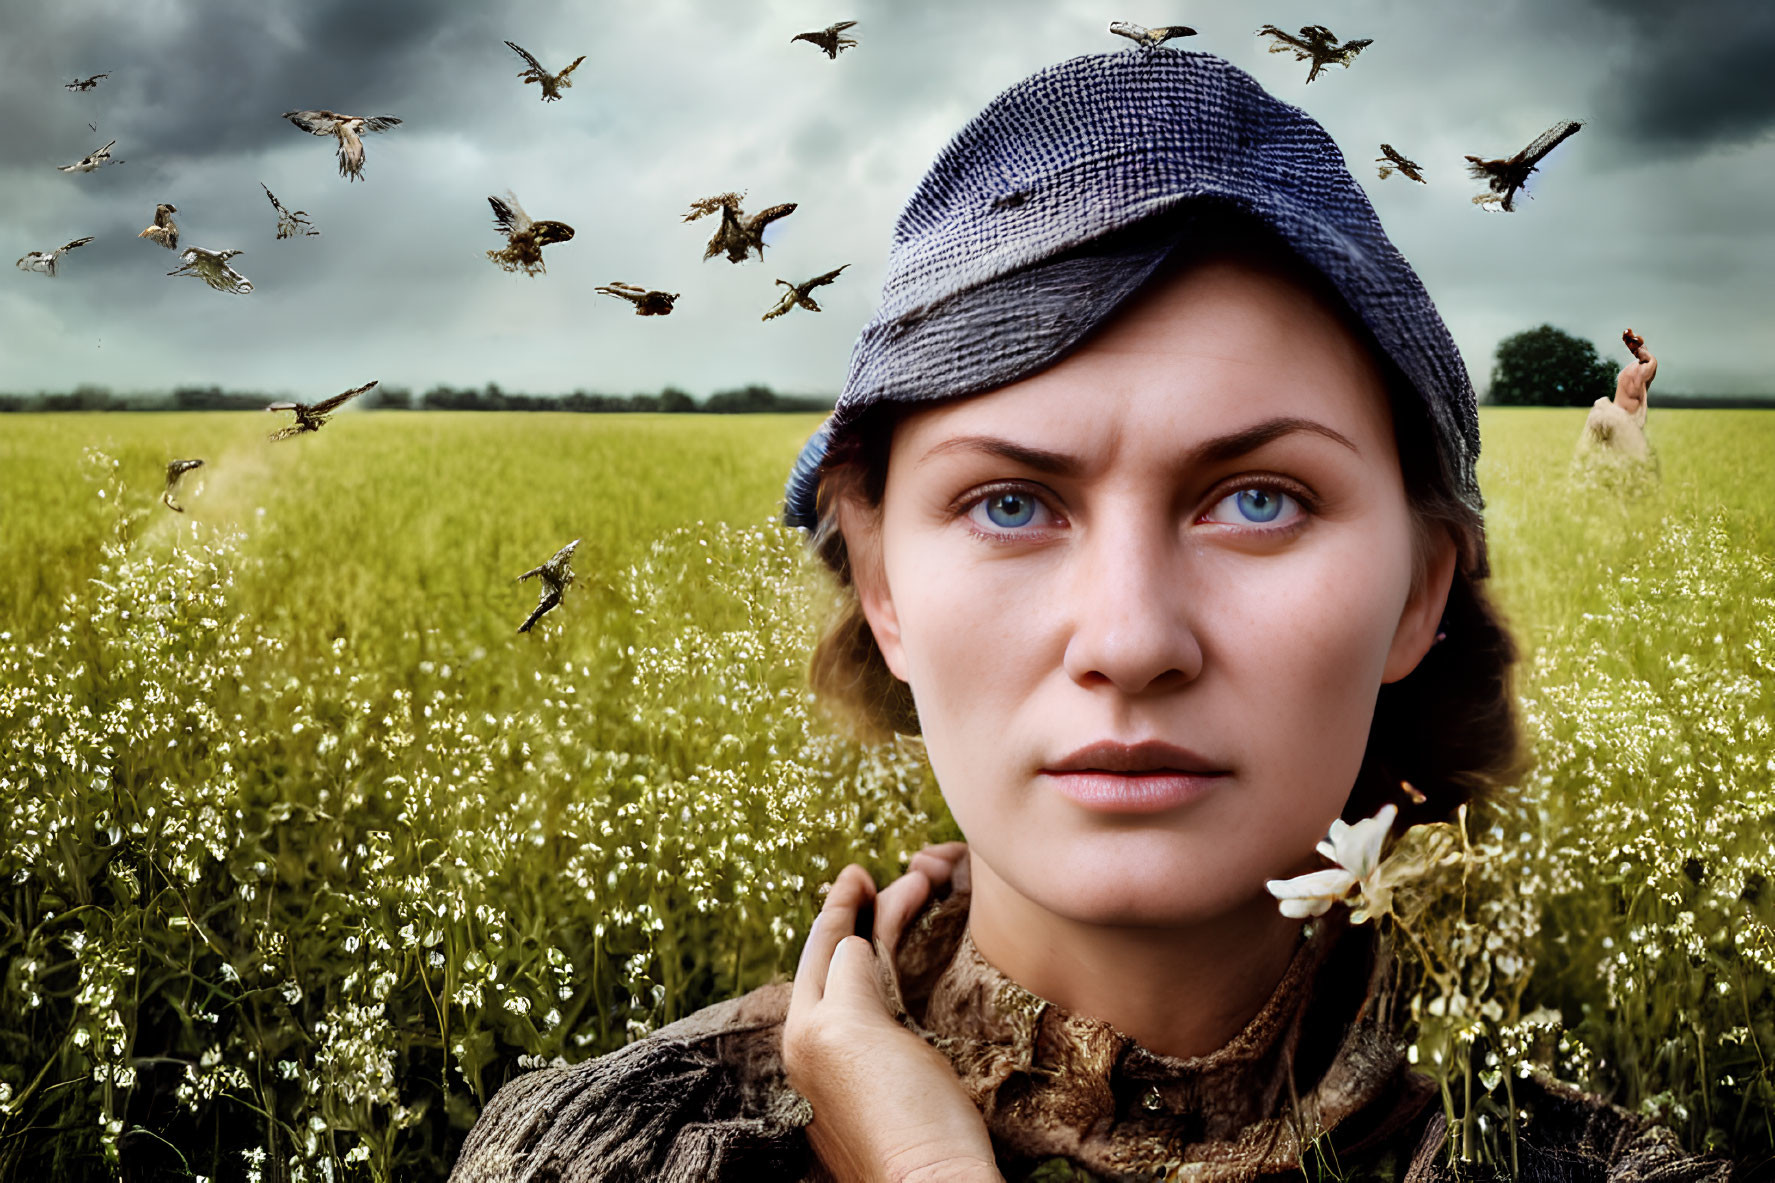 Woman with blue eyes in cap in flower field with birds and person under cloudy sky